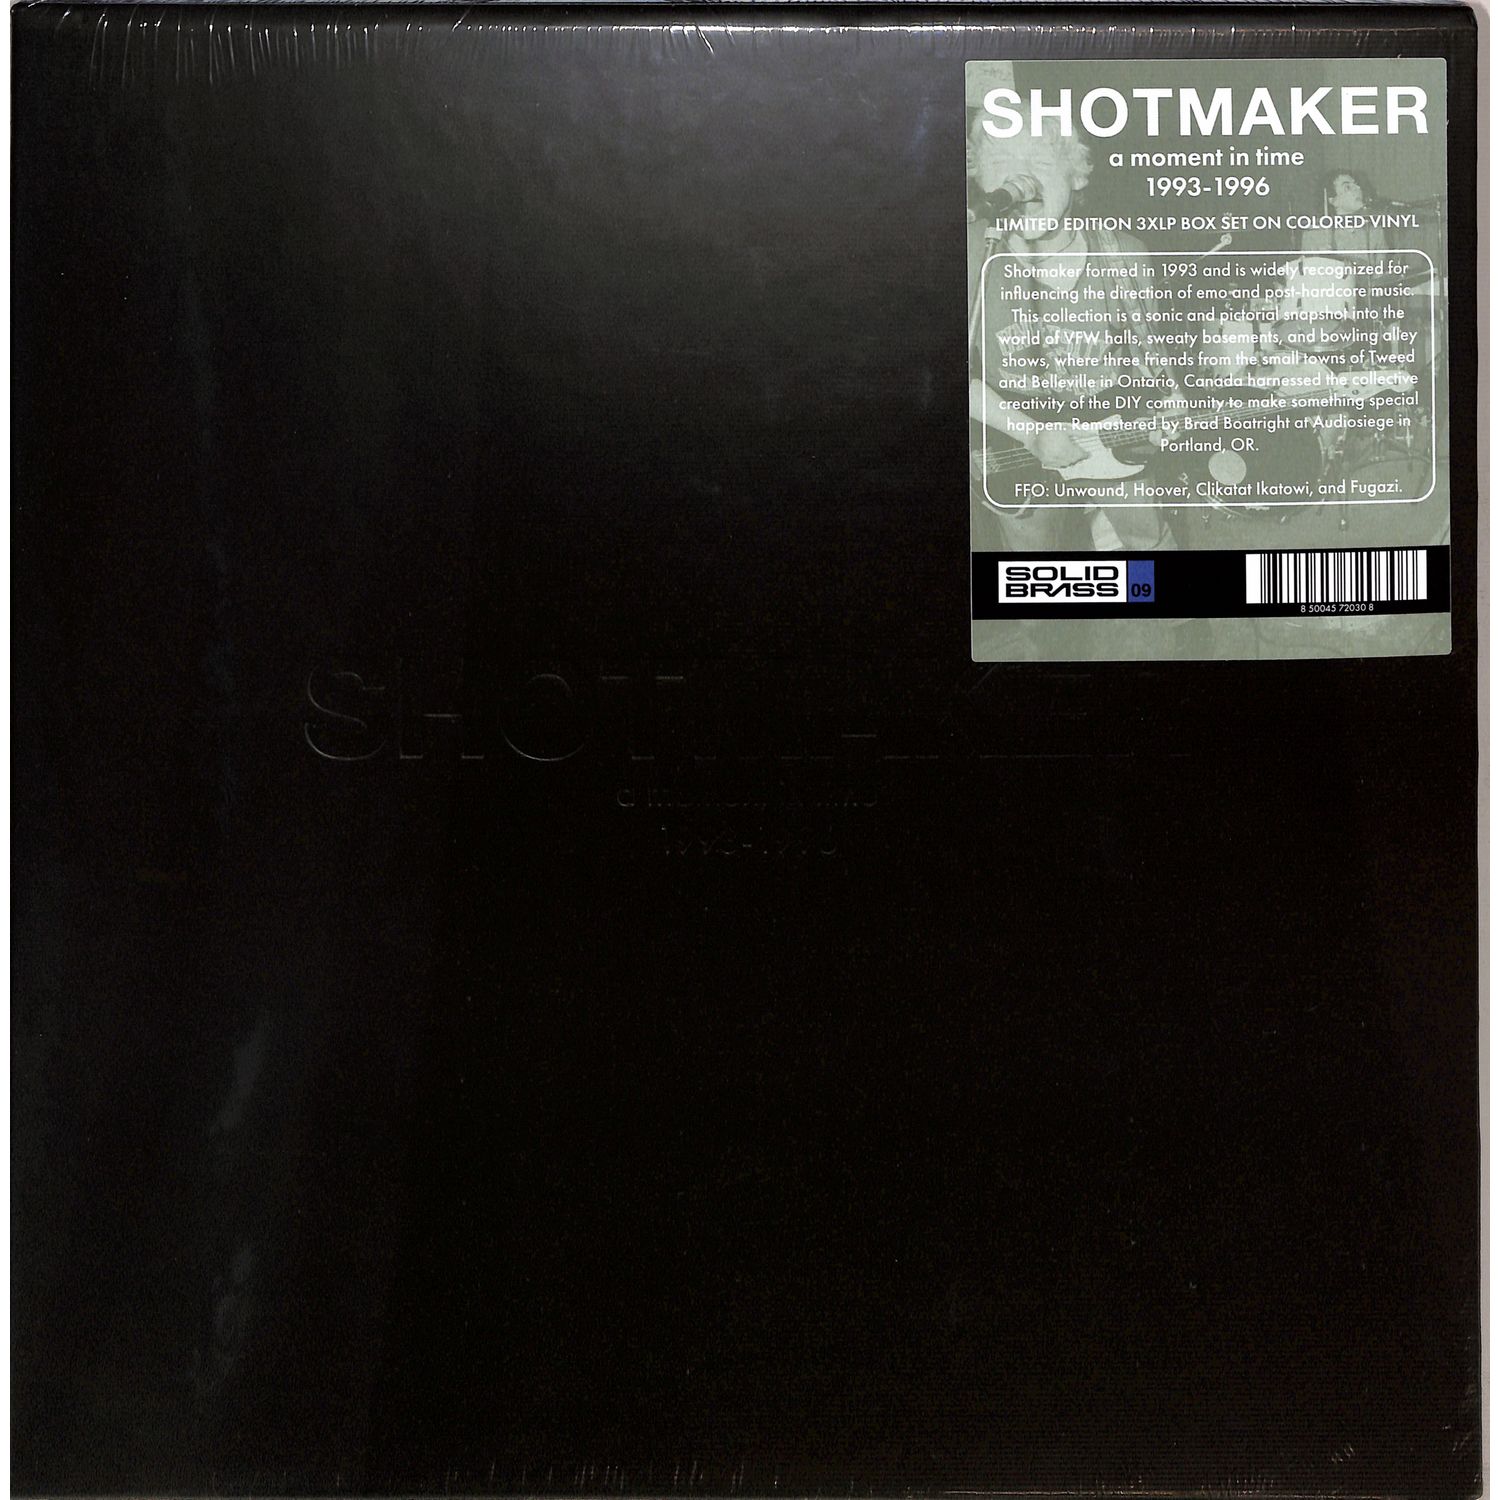 Shotmaker - A MOMENT IN TIME: 1993-1996 